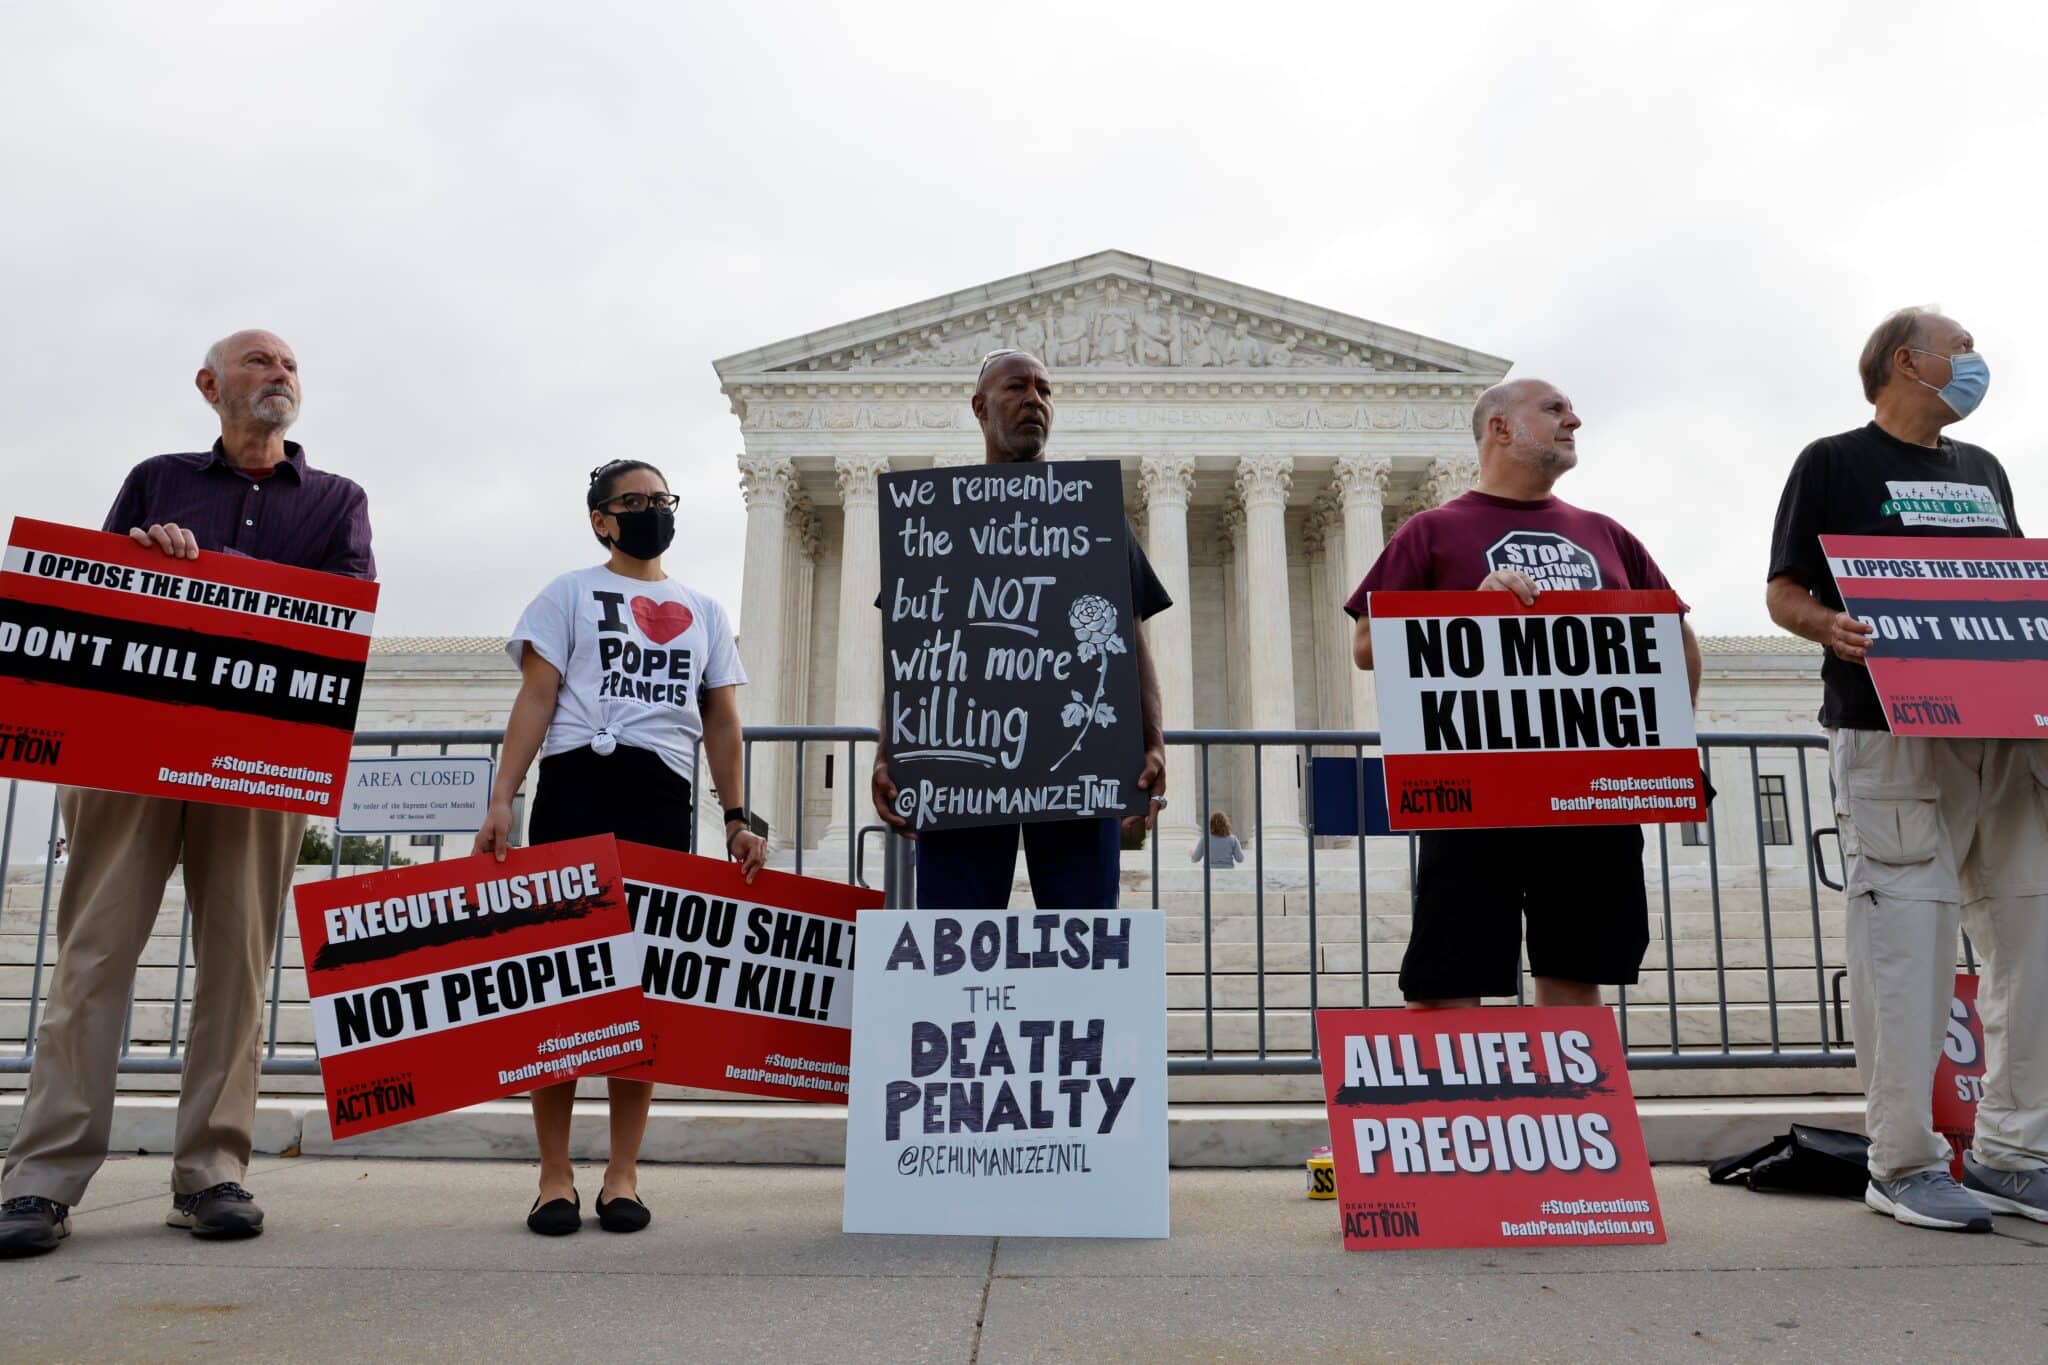 A group of demonstrators rally against the death penalty outside the U.S. Supreme Court building in Washington Oct. 13, 2021. (CNS photo/Jonathan Ernst, Reuters)